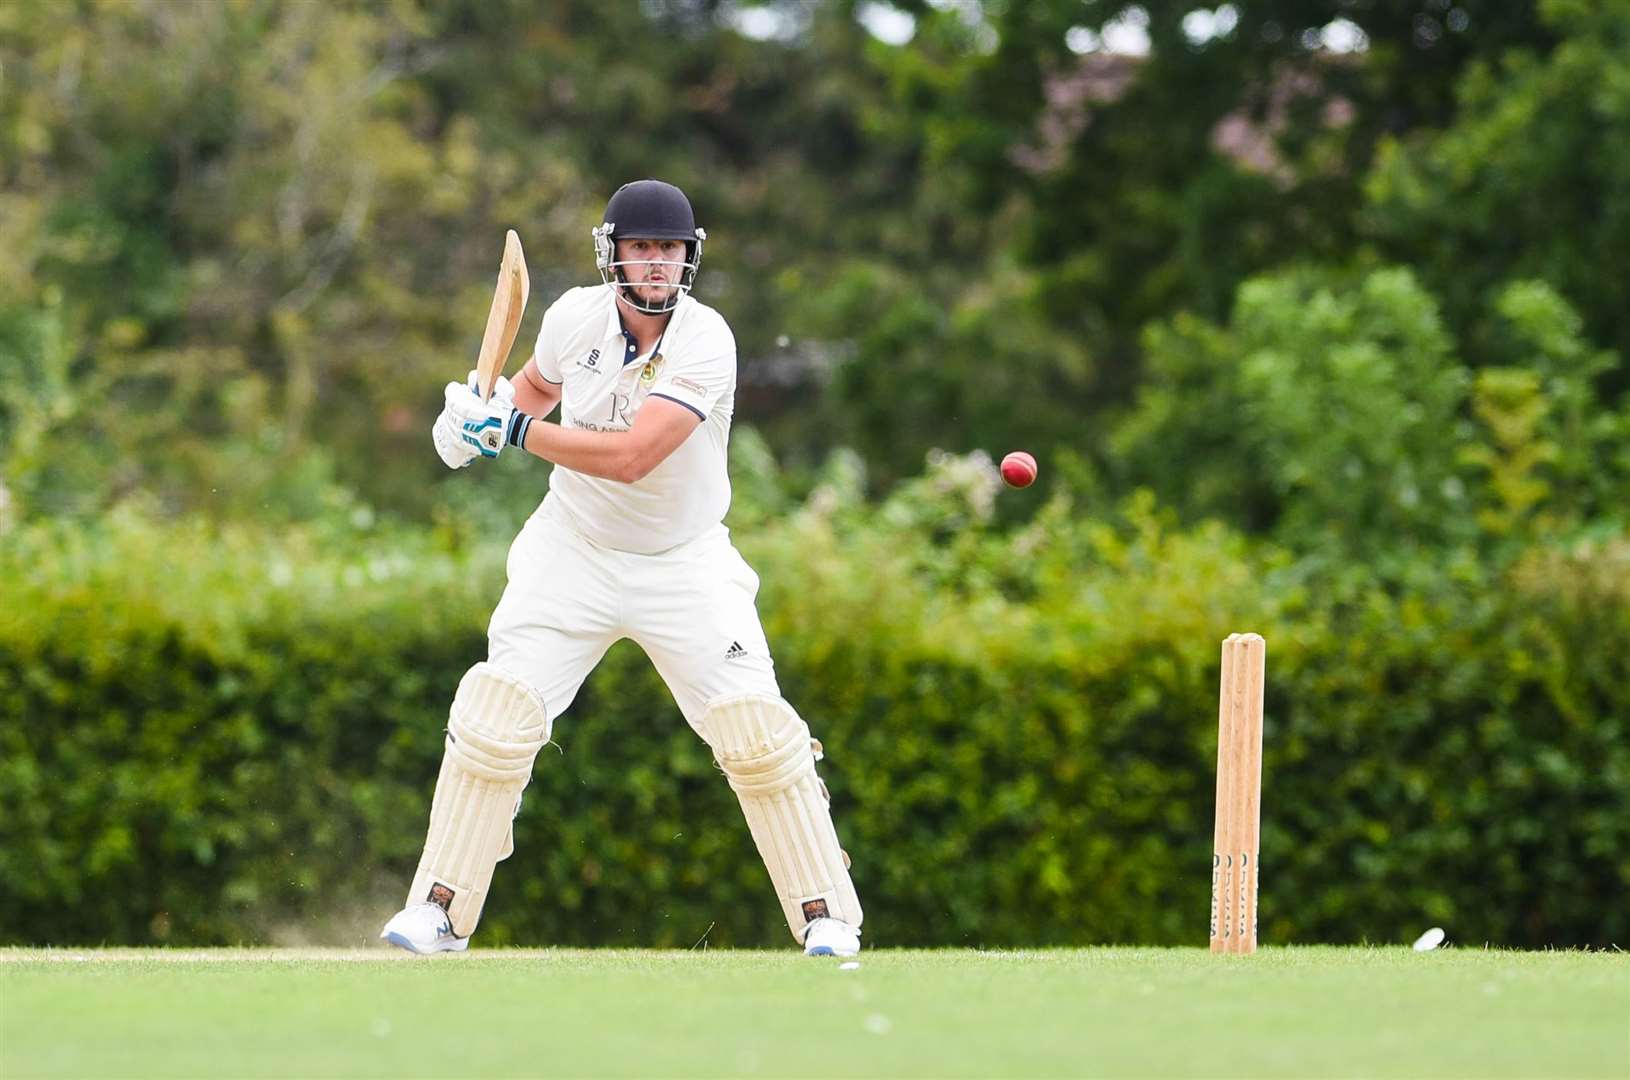 North Runcton batsman Ben Skipper celebrated his recall to the first team with a century on Saturday.